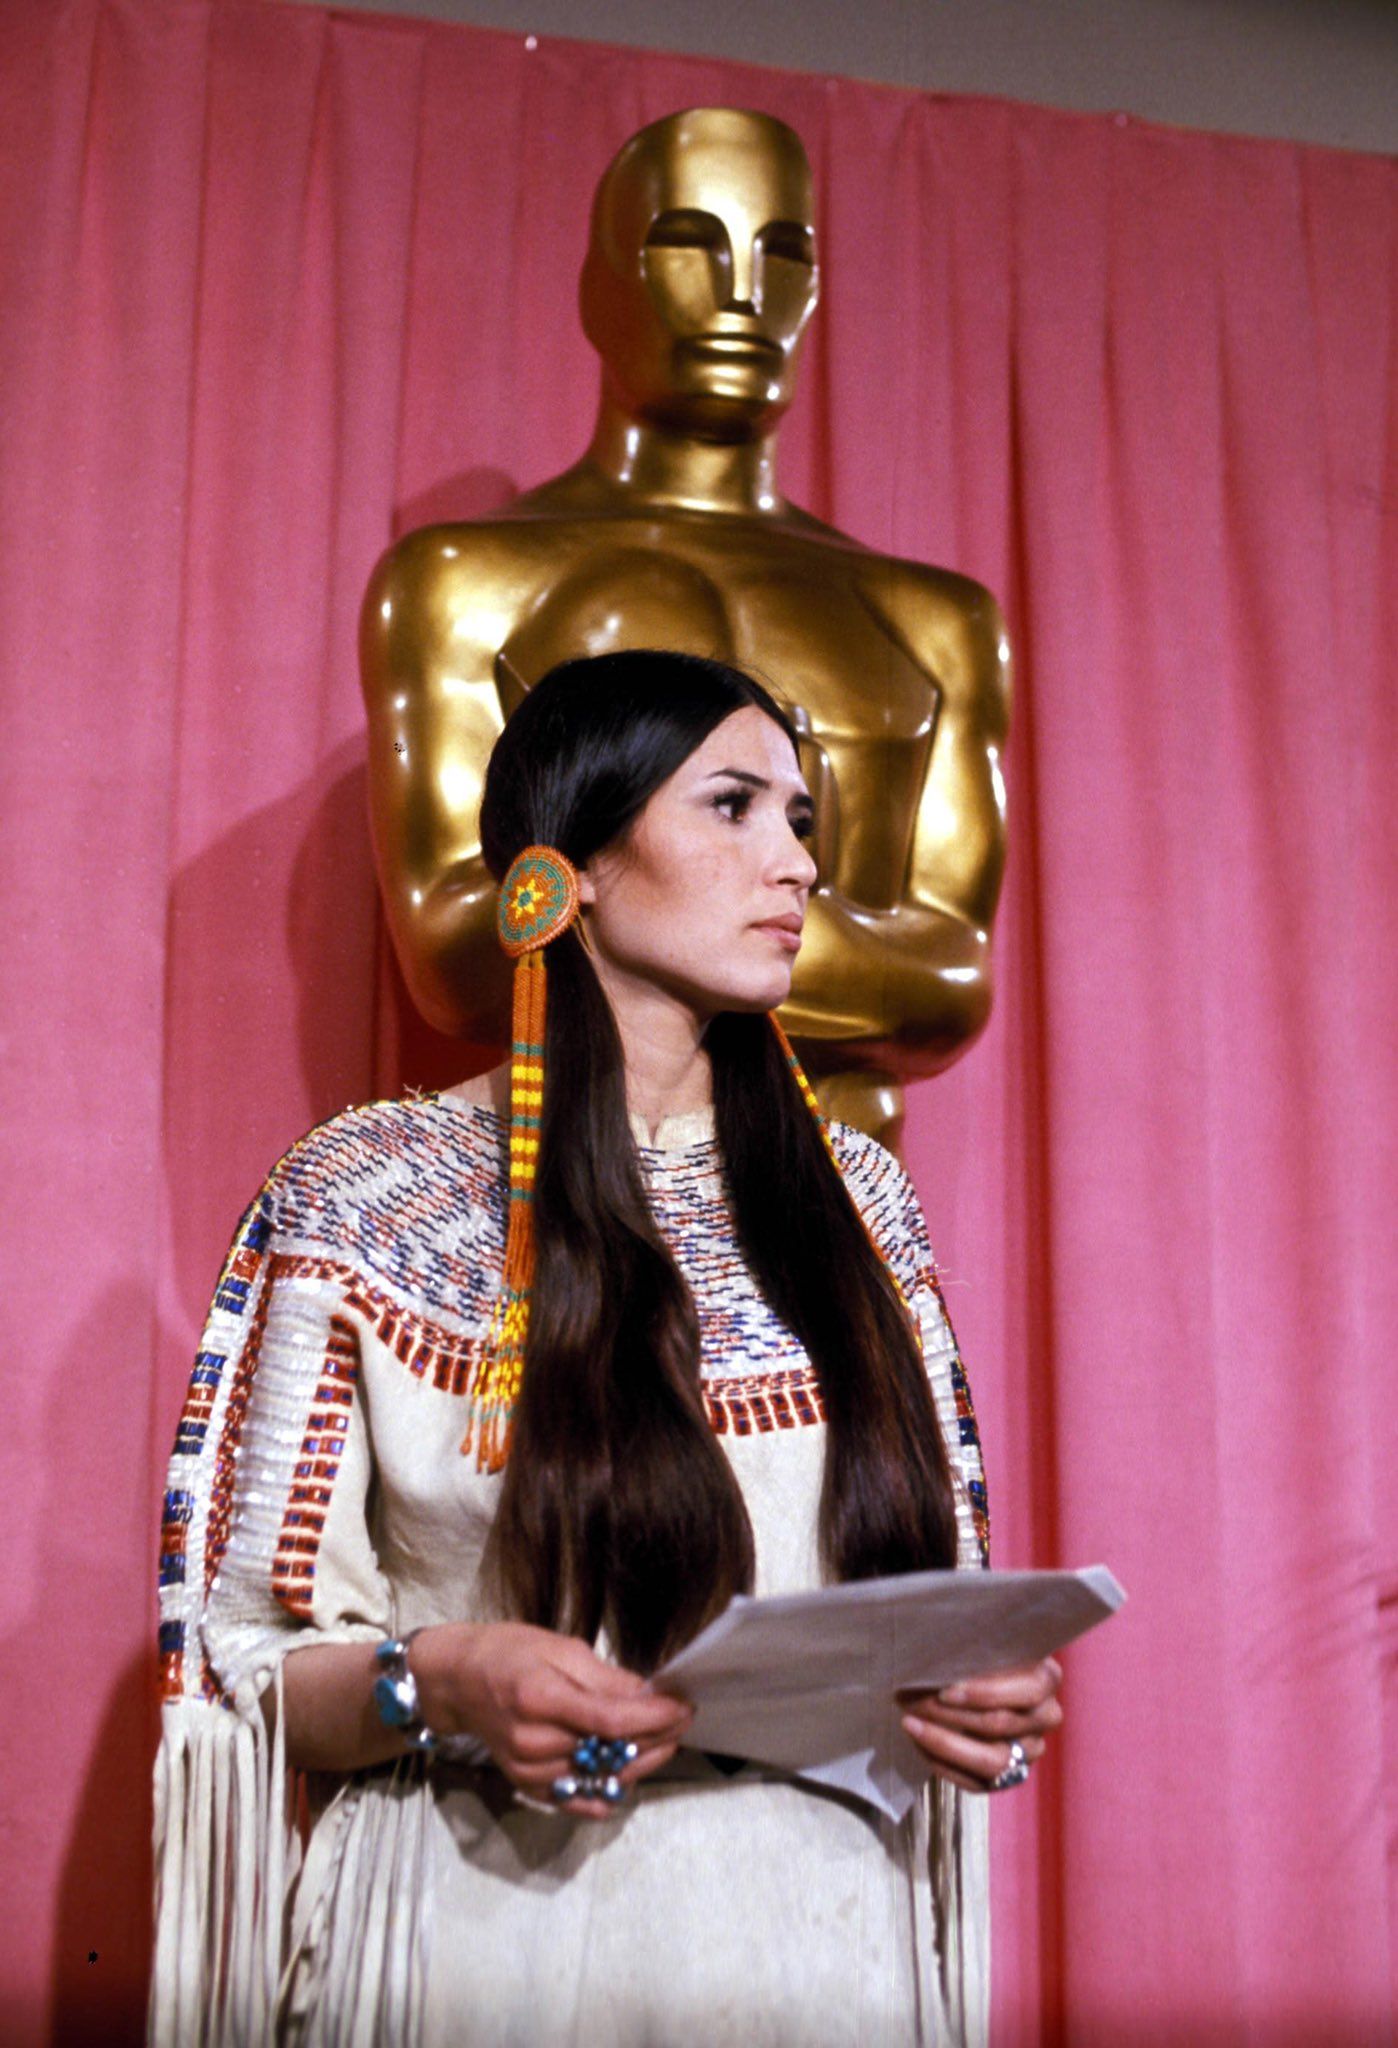 Sacheen Littlefeather not Native American but Mexican, sisters claim